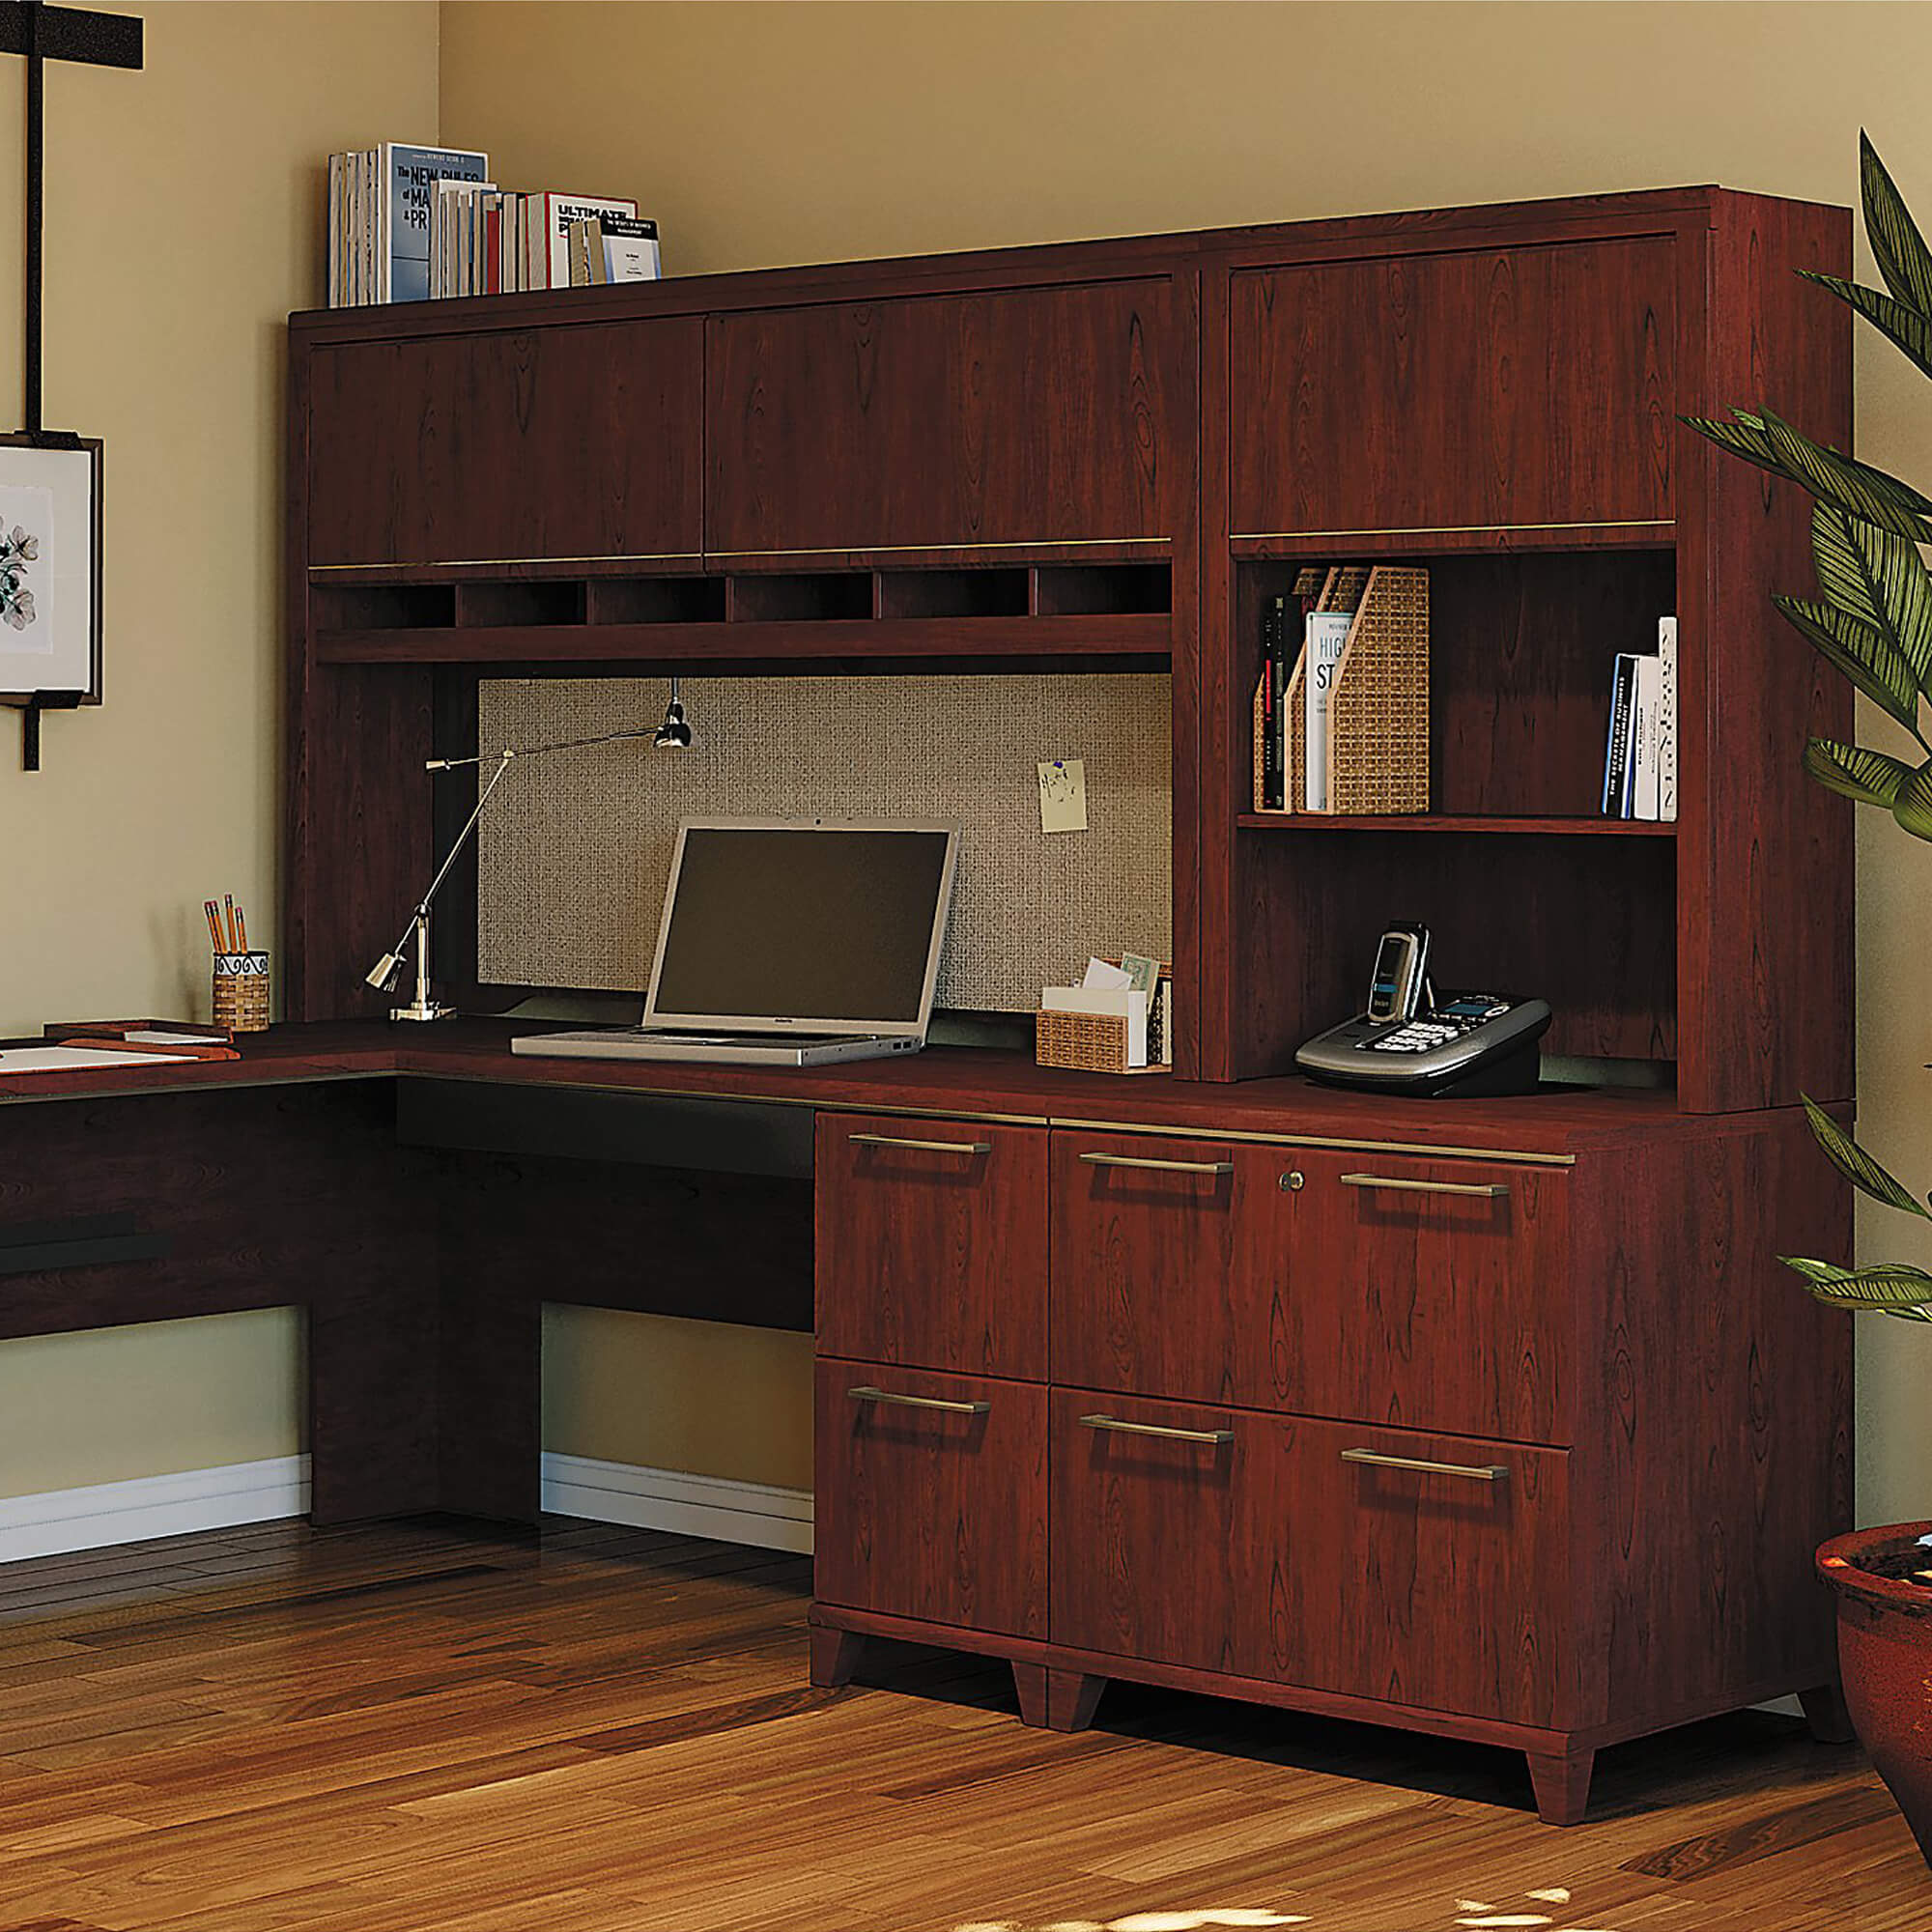 Home office storage ideas overview